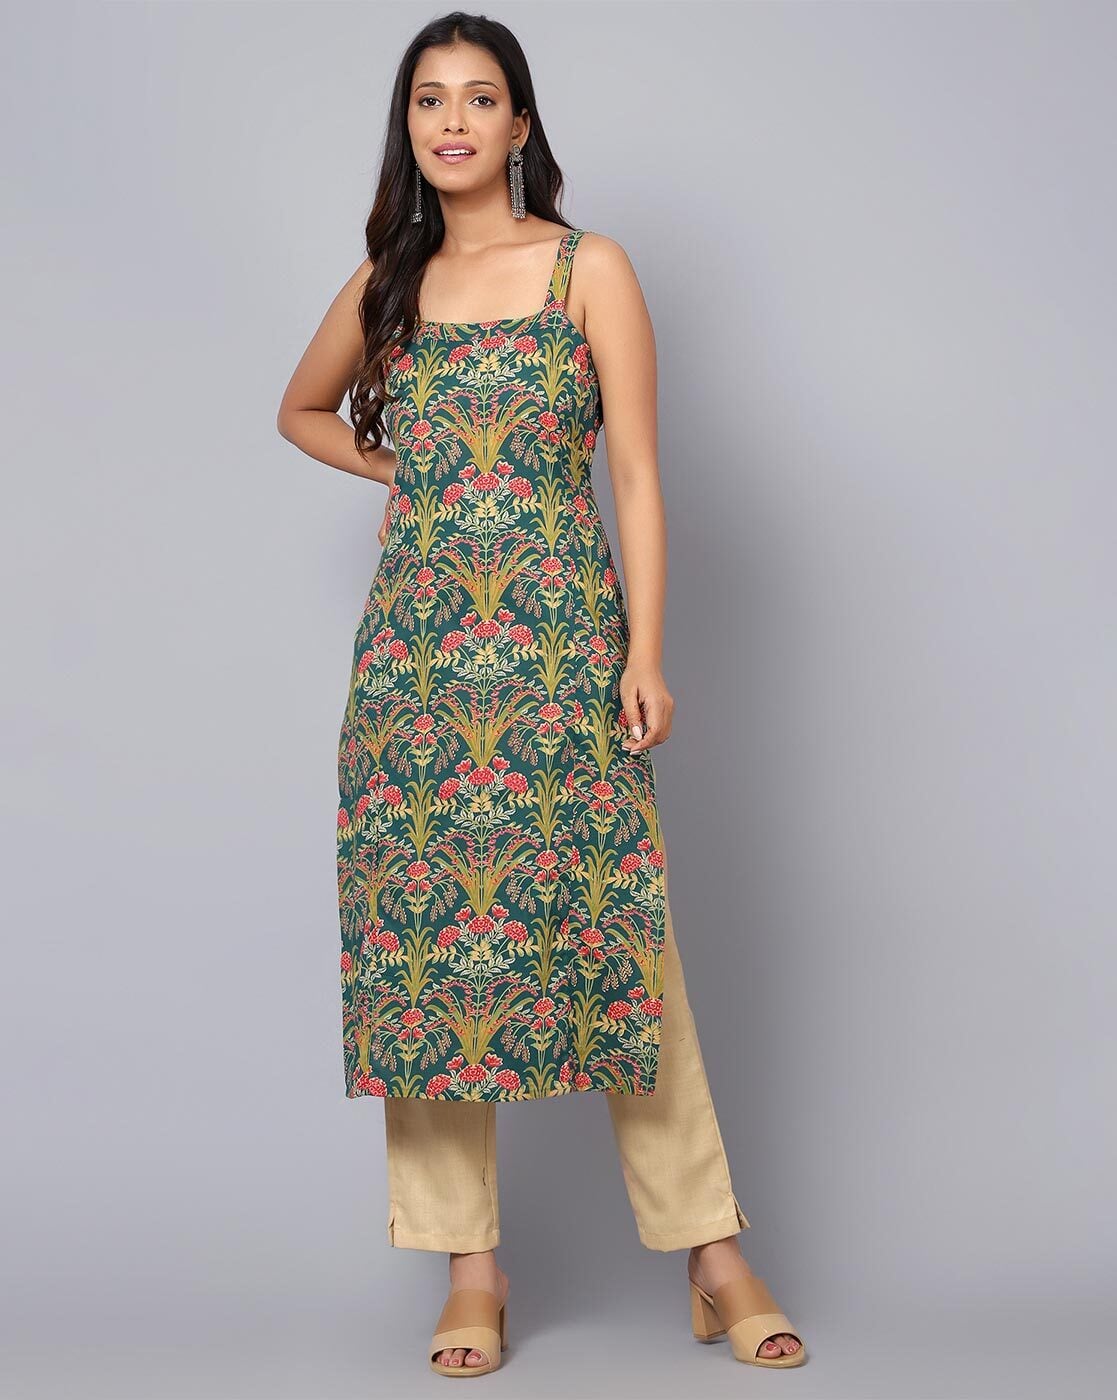 Buy Srishti by FBB Embroidered Ethnic Dress at Amazon.in